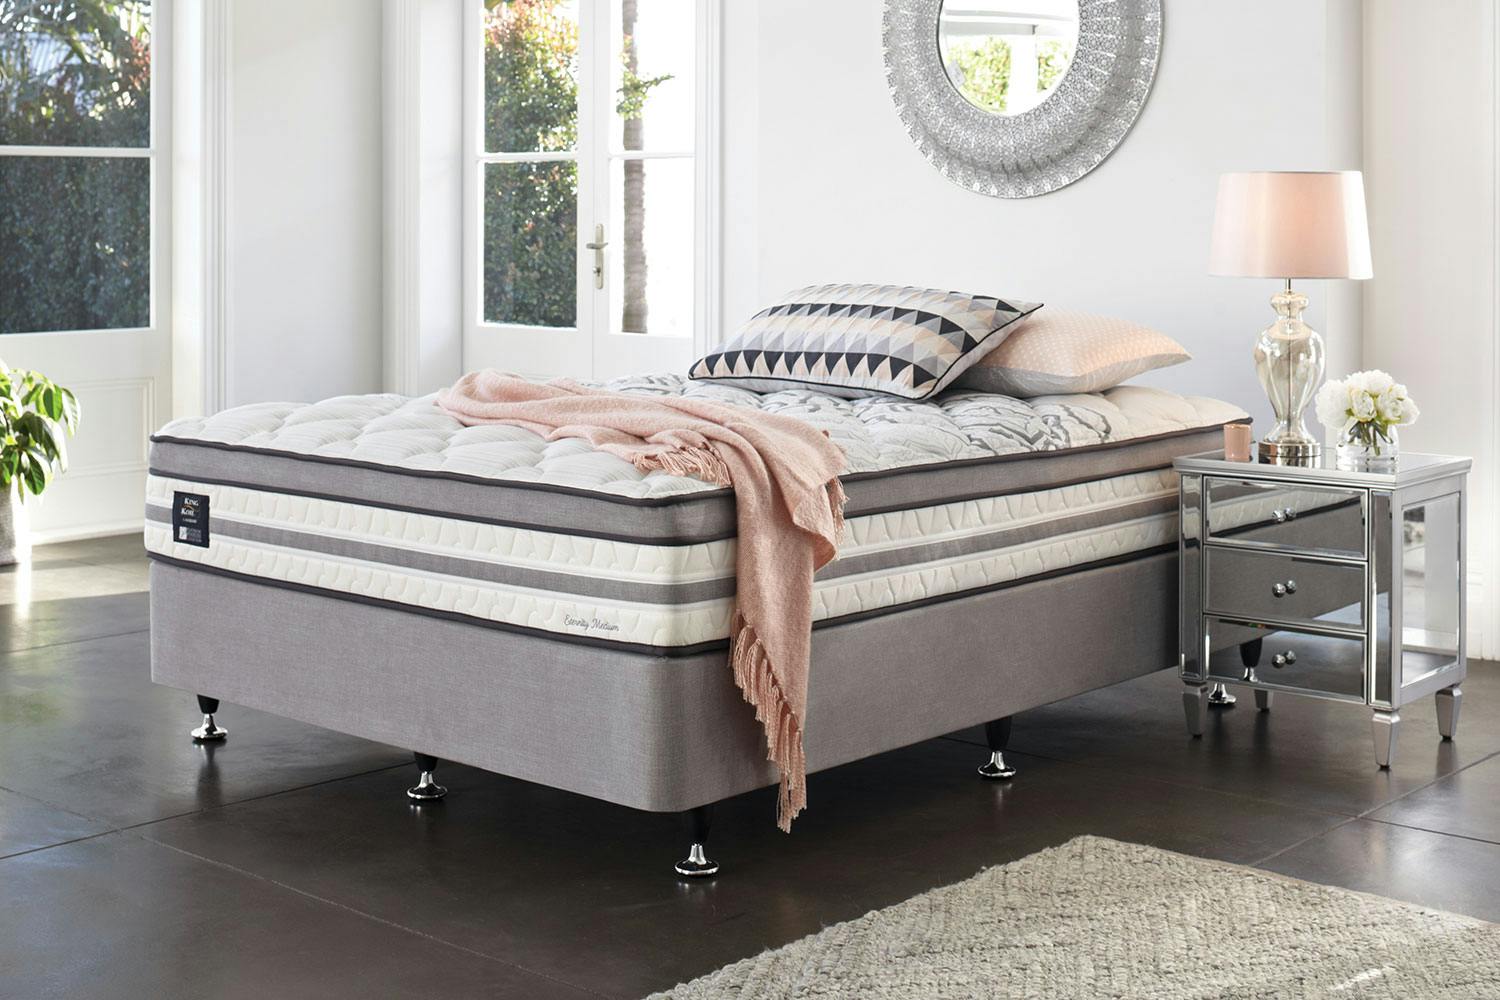 Explore 77+ Charming king koil eternity mattress You Won't Be Disappointed